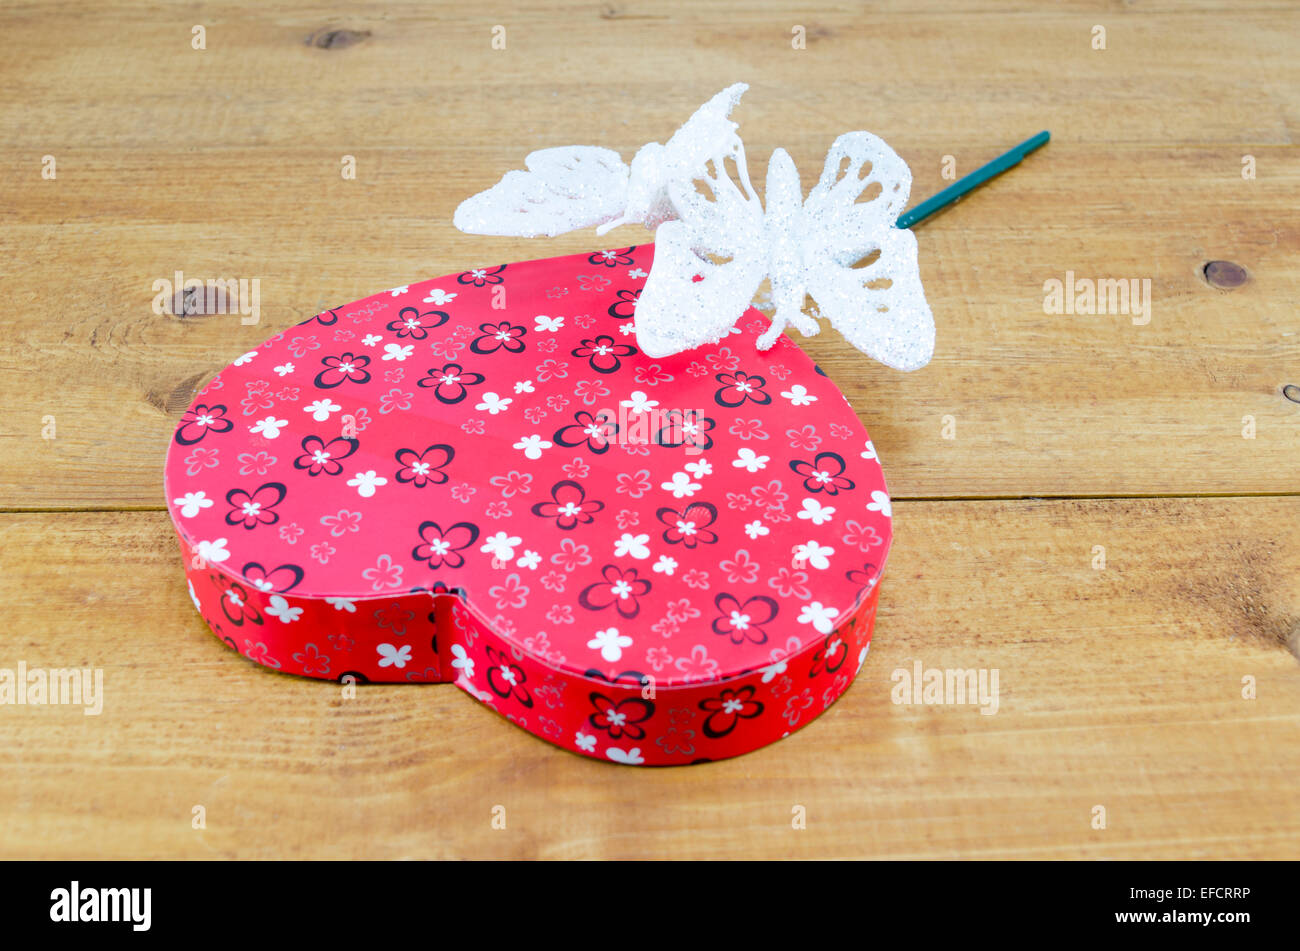 Heart shaped box and a butterfly shaped magic wand on a wooden table Stock Photo